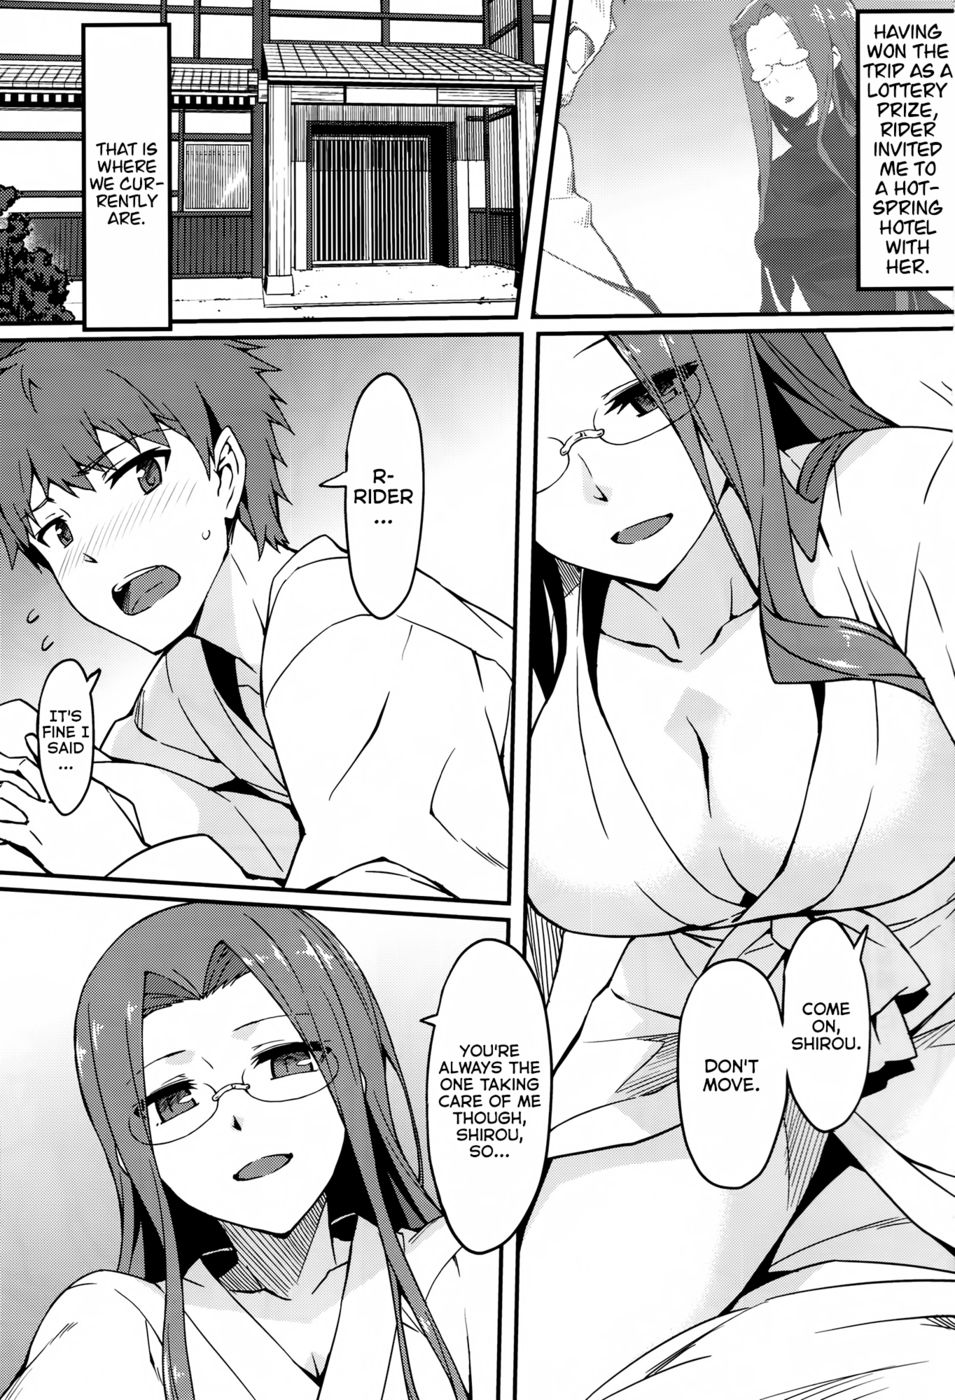 Hentai Manga Comic-Hot Spring Inn With Rider-san. After Story-Read-3